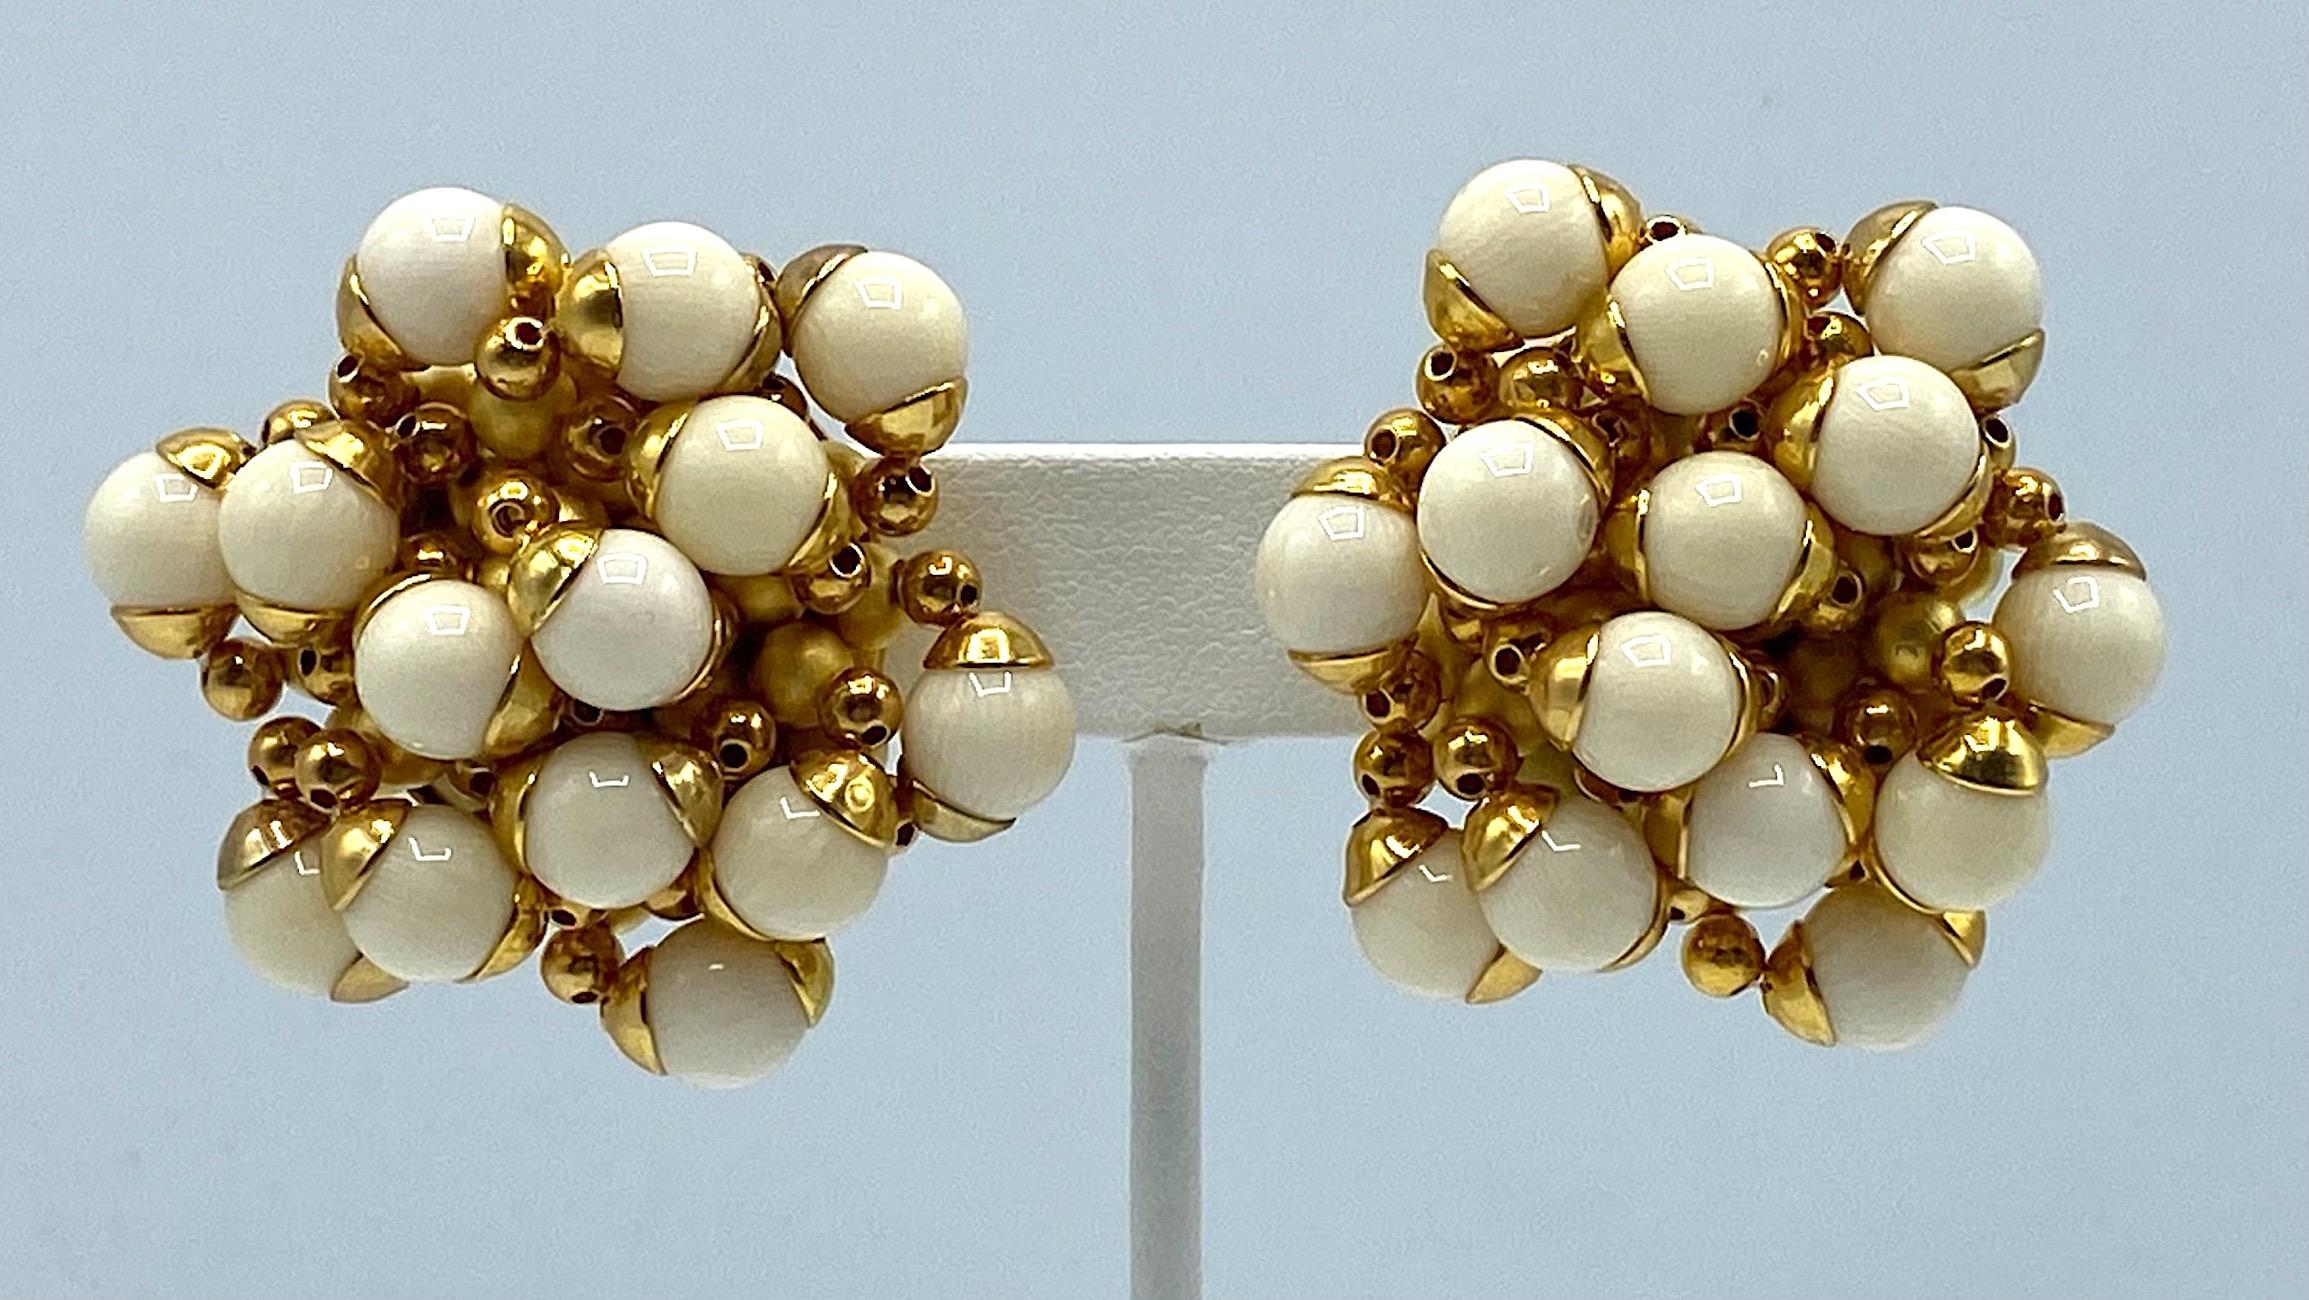 A stunning statement pair of ivory color cluster bead earrings by Italian fashion house Trussardi. Each bead is carefully strung with top and bottom gold caps and a smaller bead in between. Each earrings is approximately 1.75 inches in diameter and